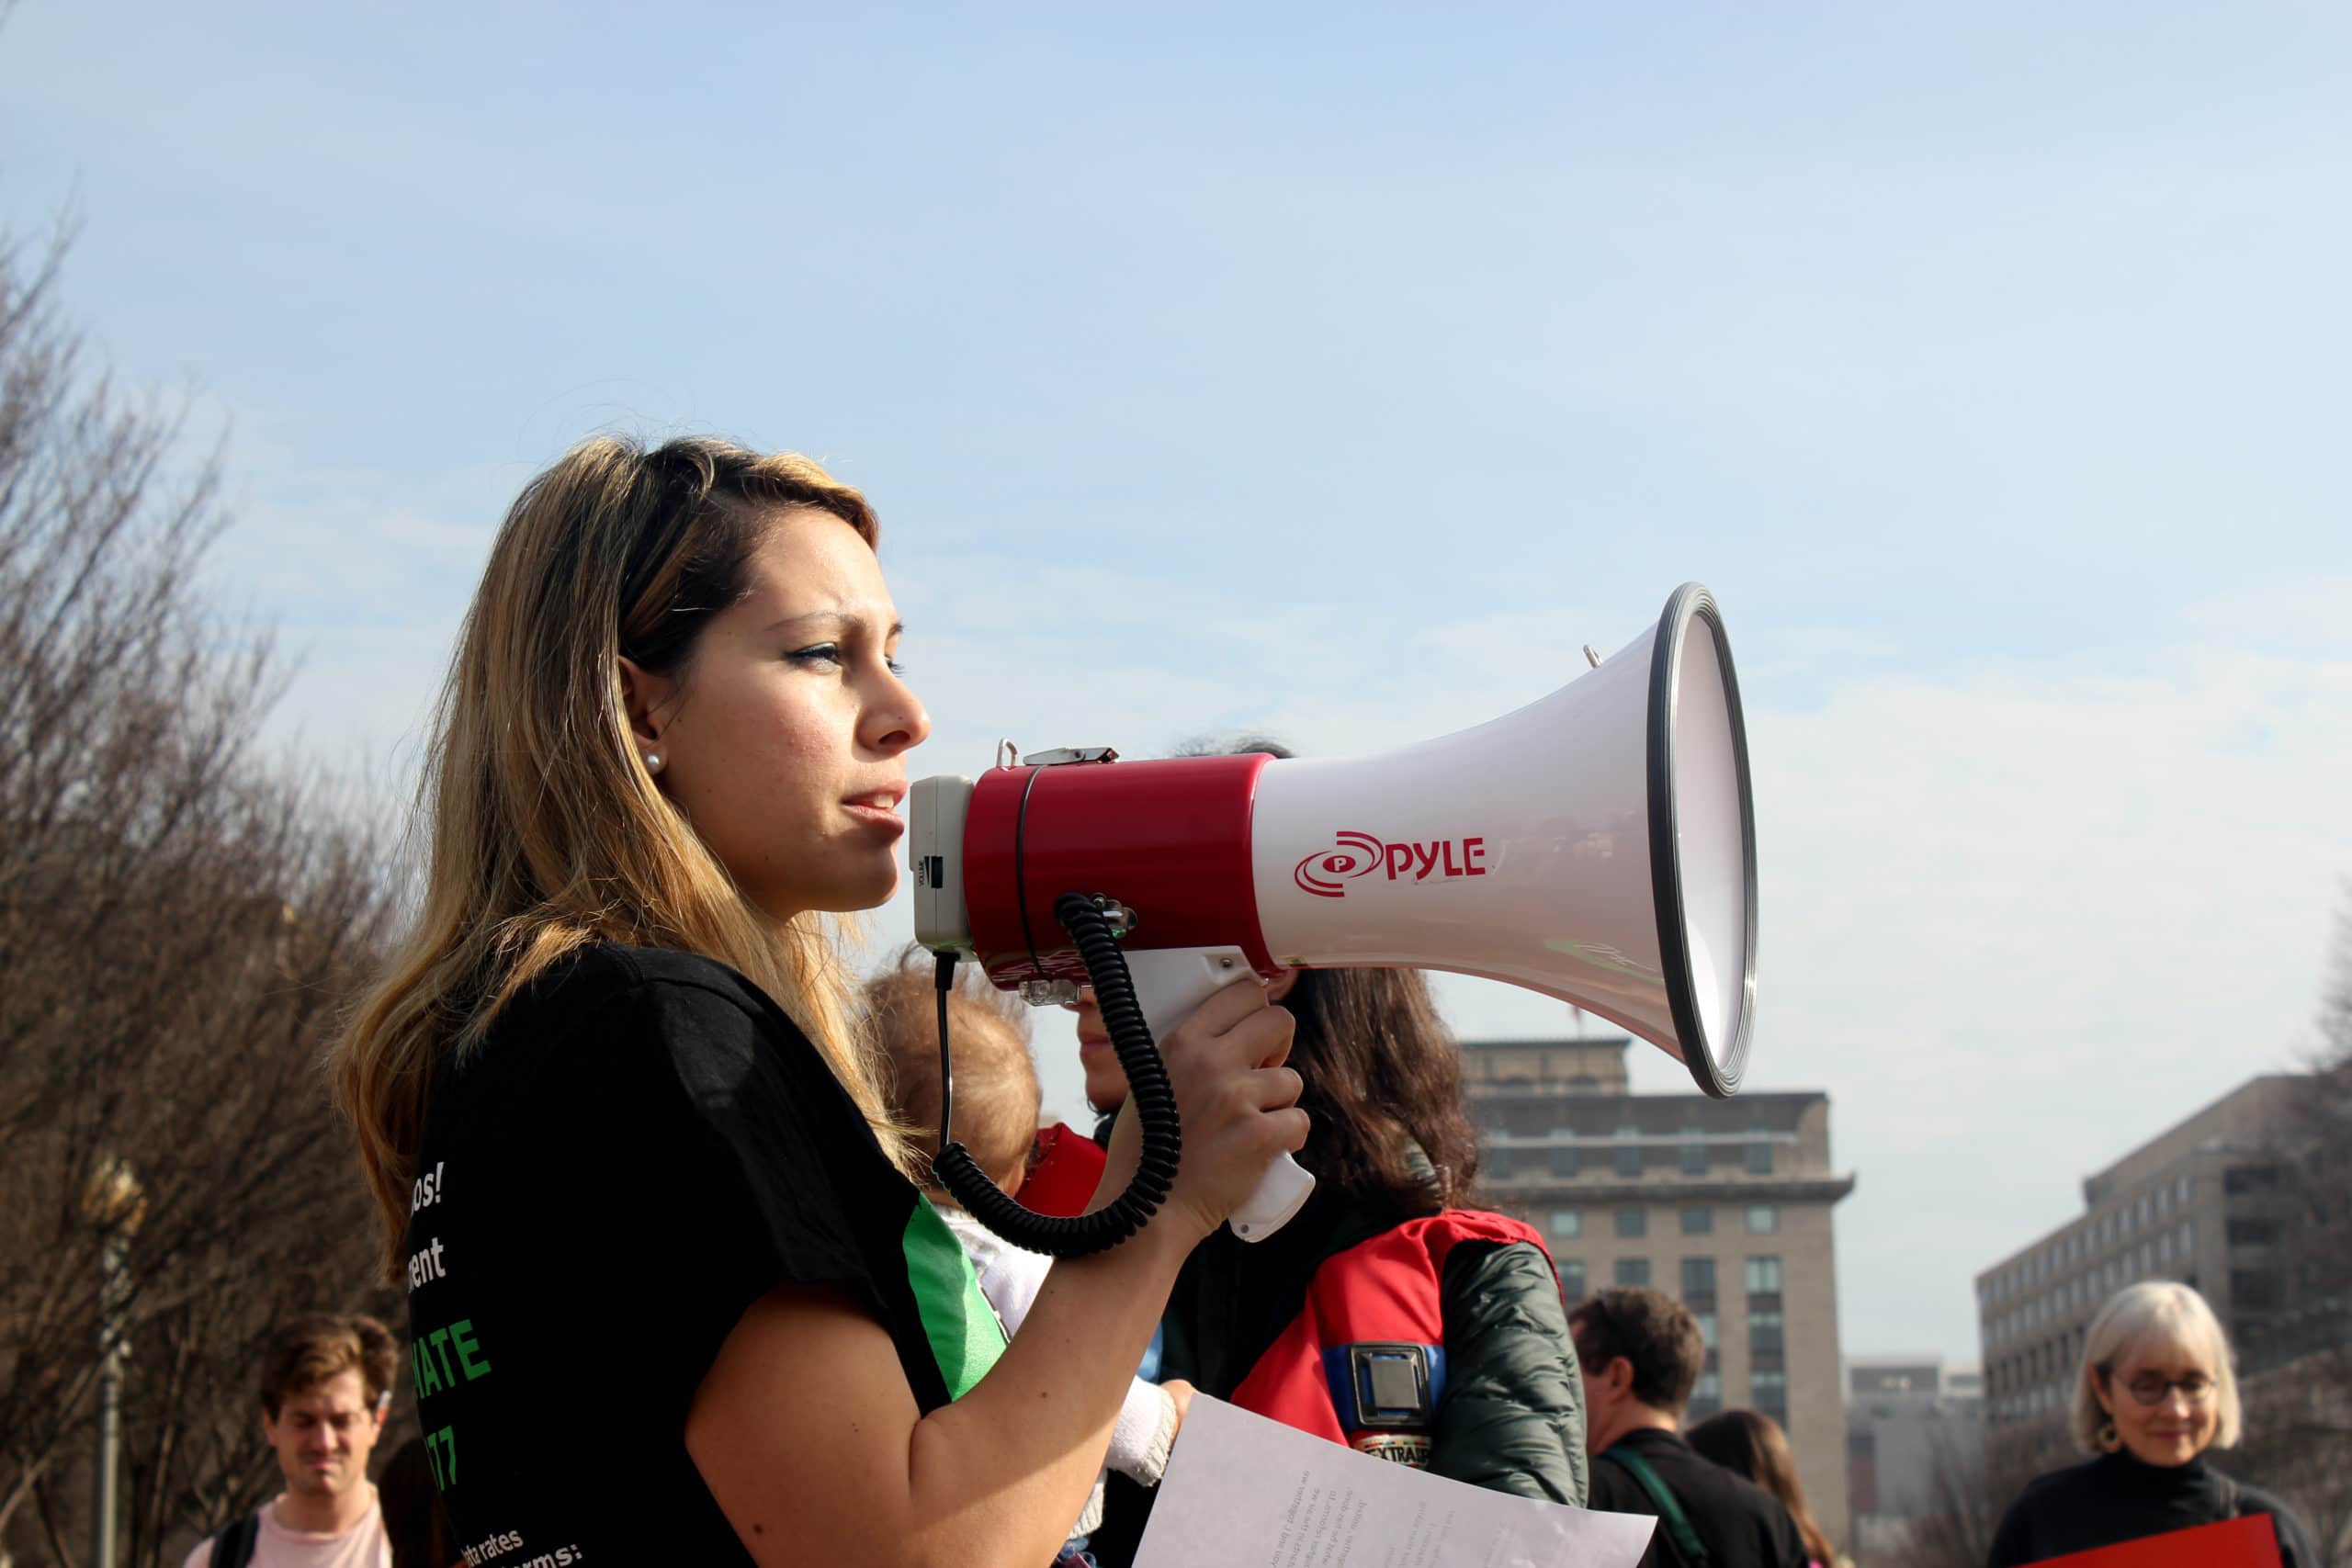 An activist speaking into a megaphone at a protest